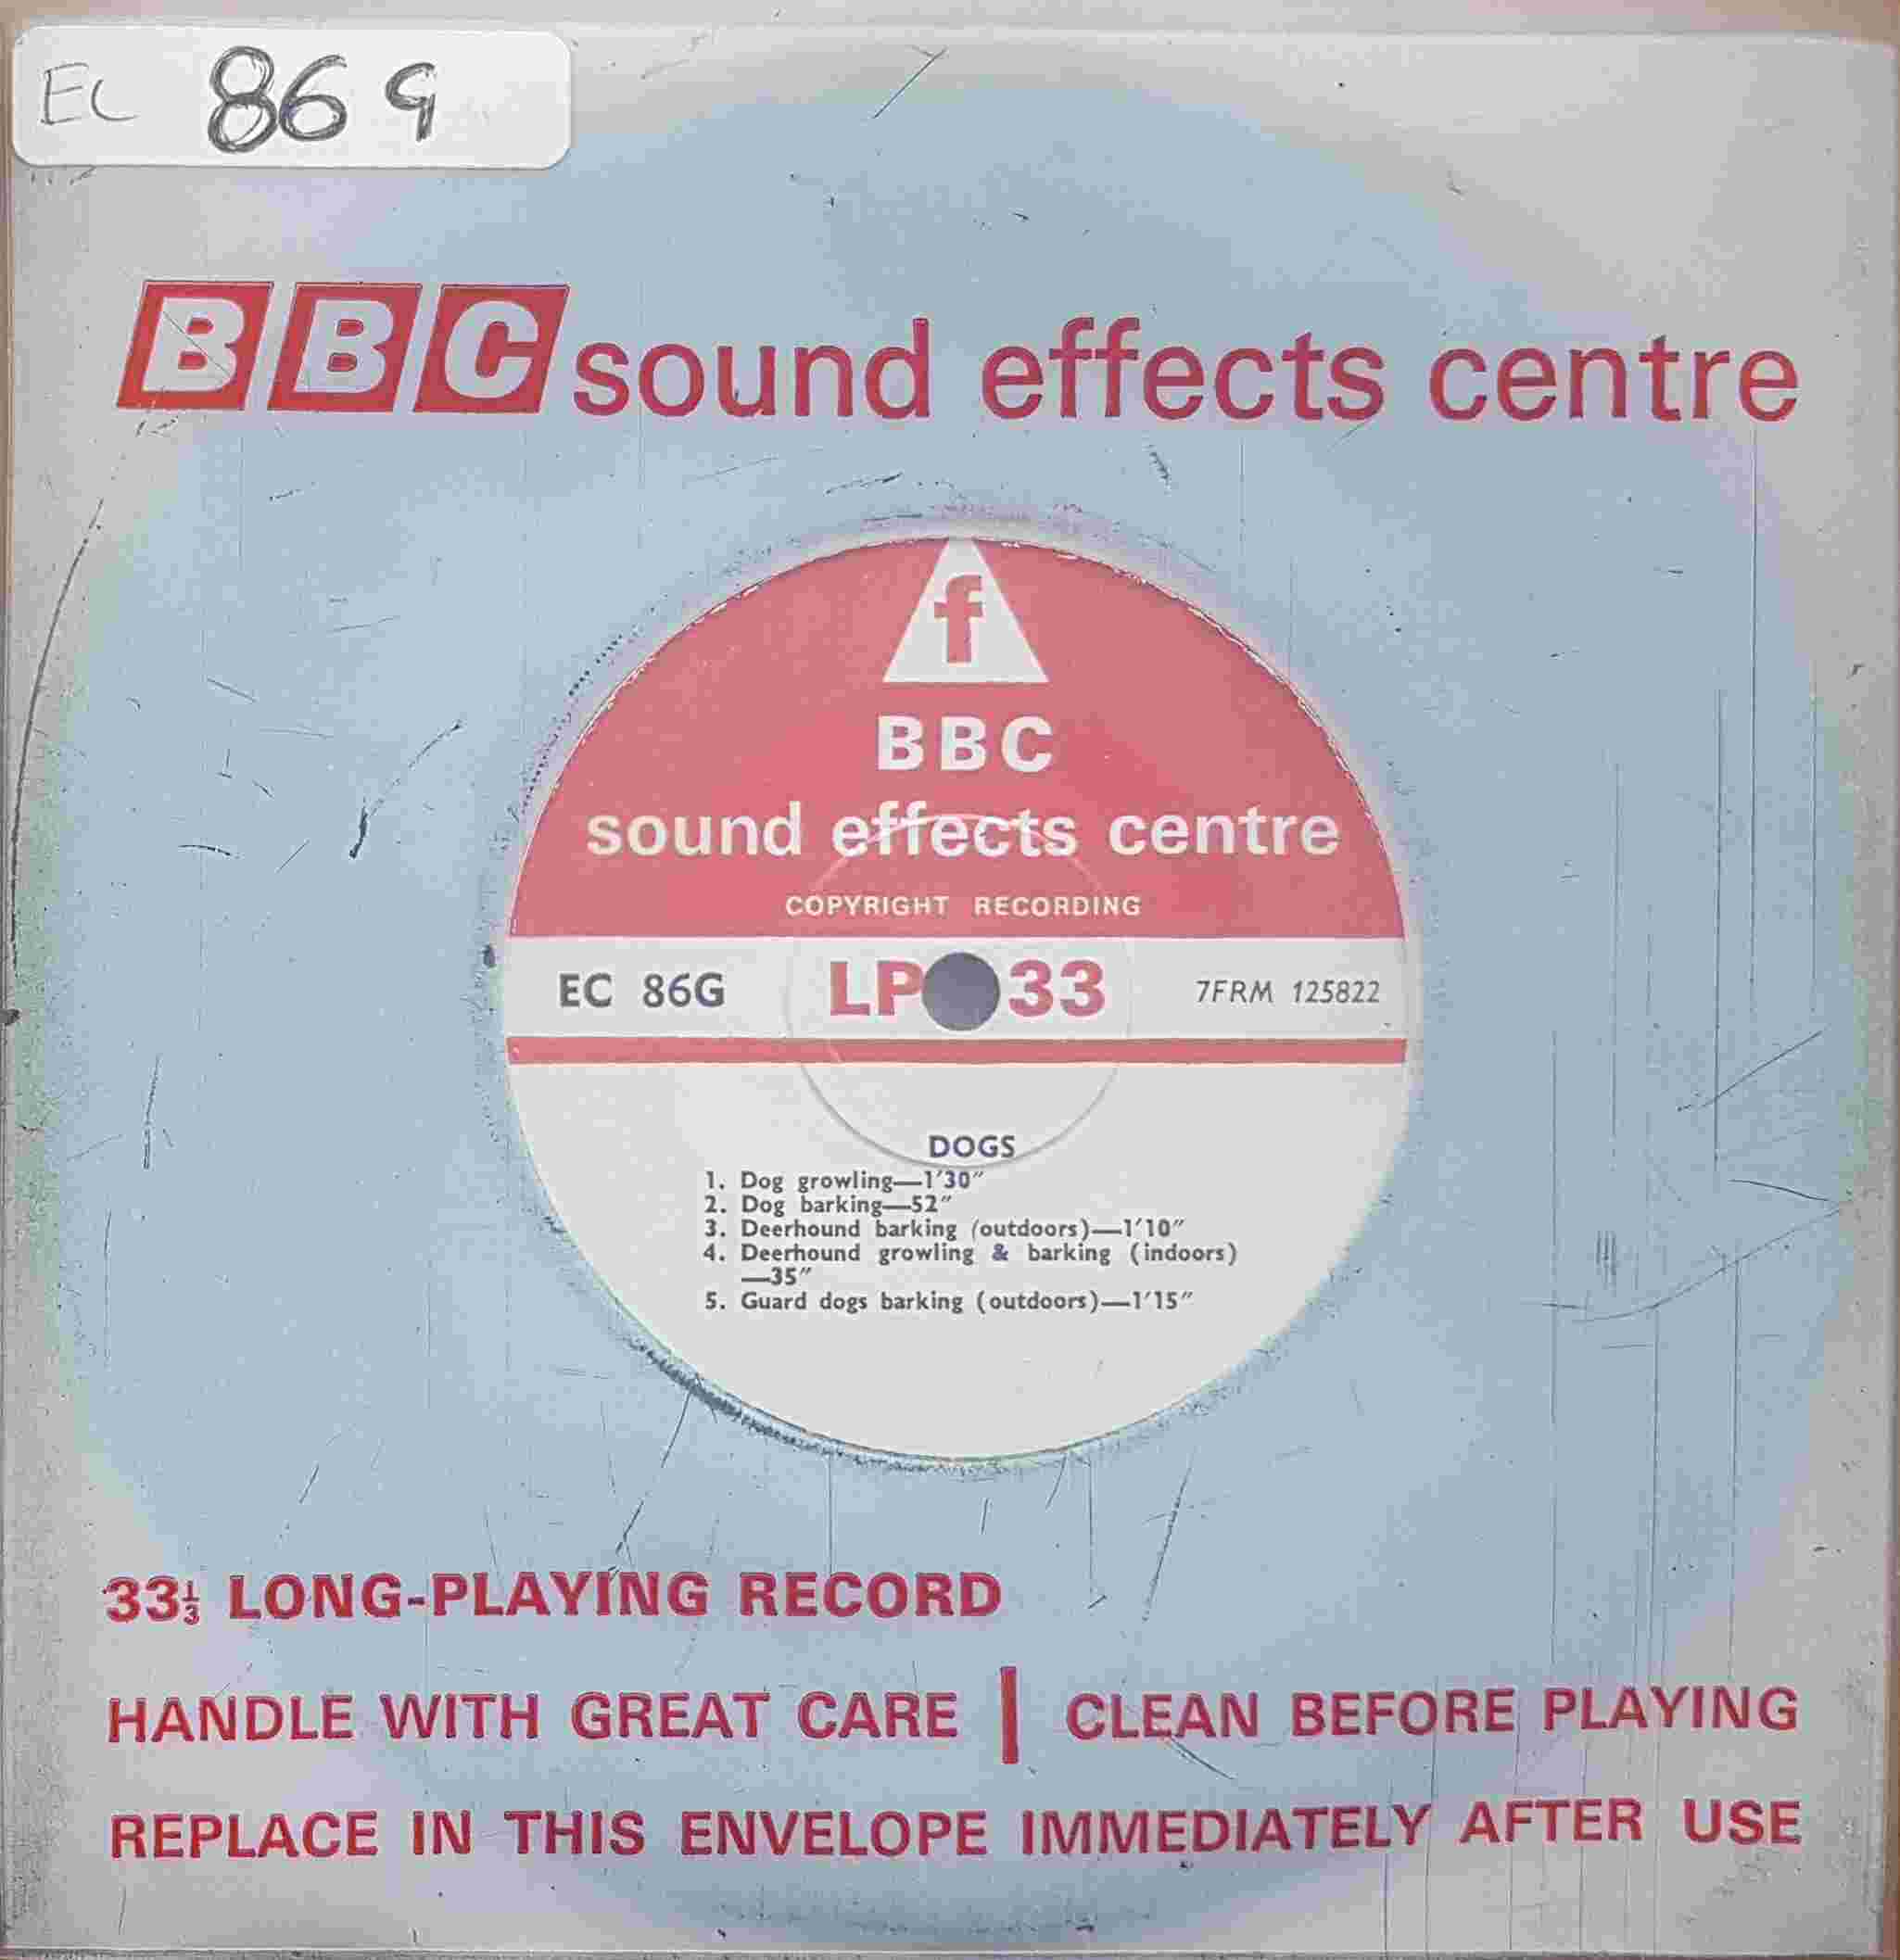 Picture of EC 86G Dogs by artist Not registered from the BBC singles - Records and Tapes library